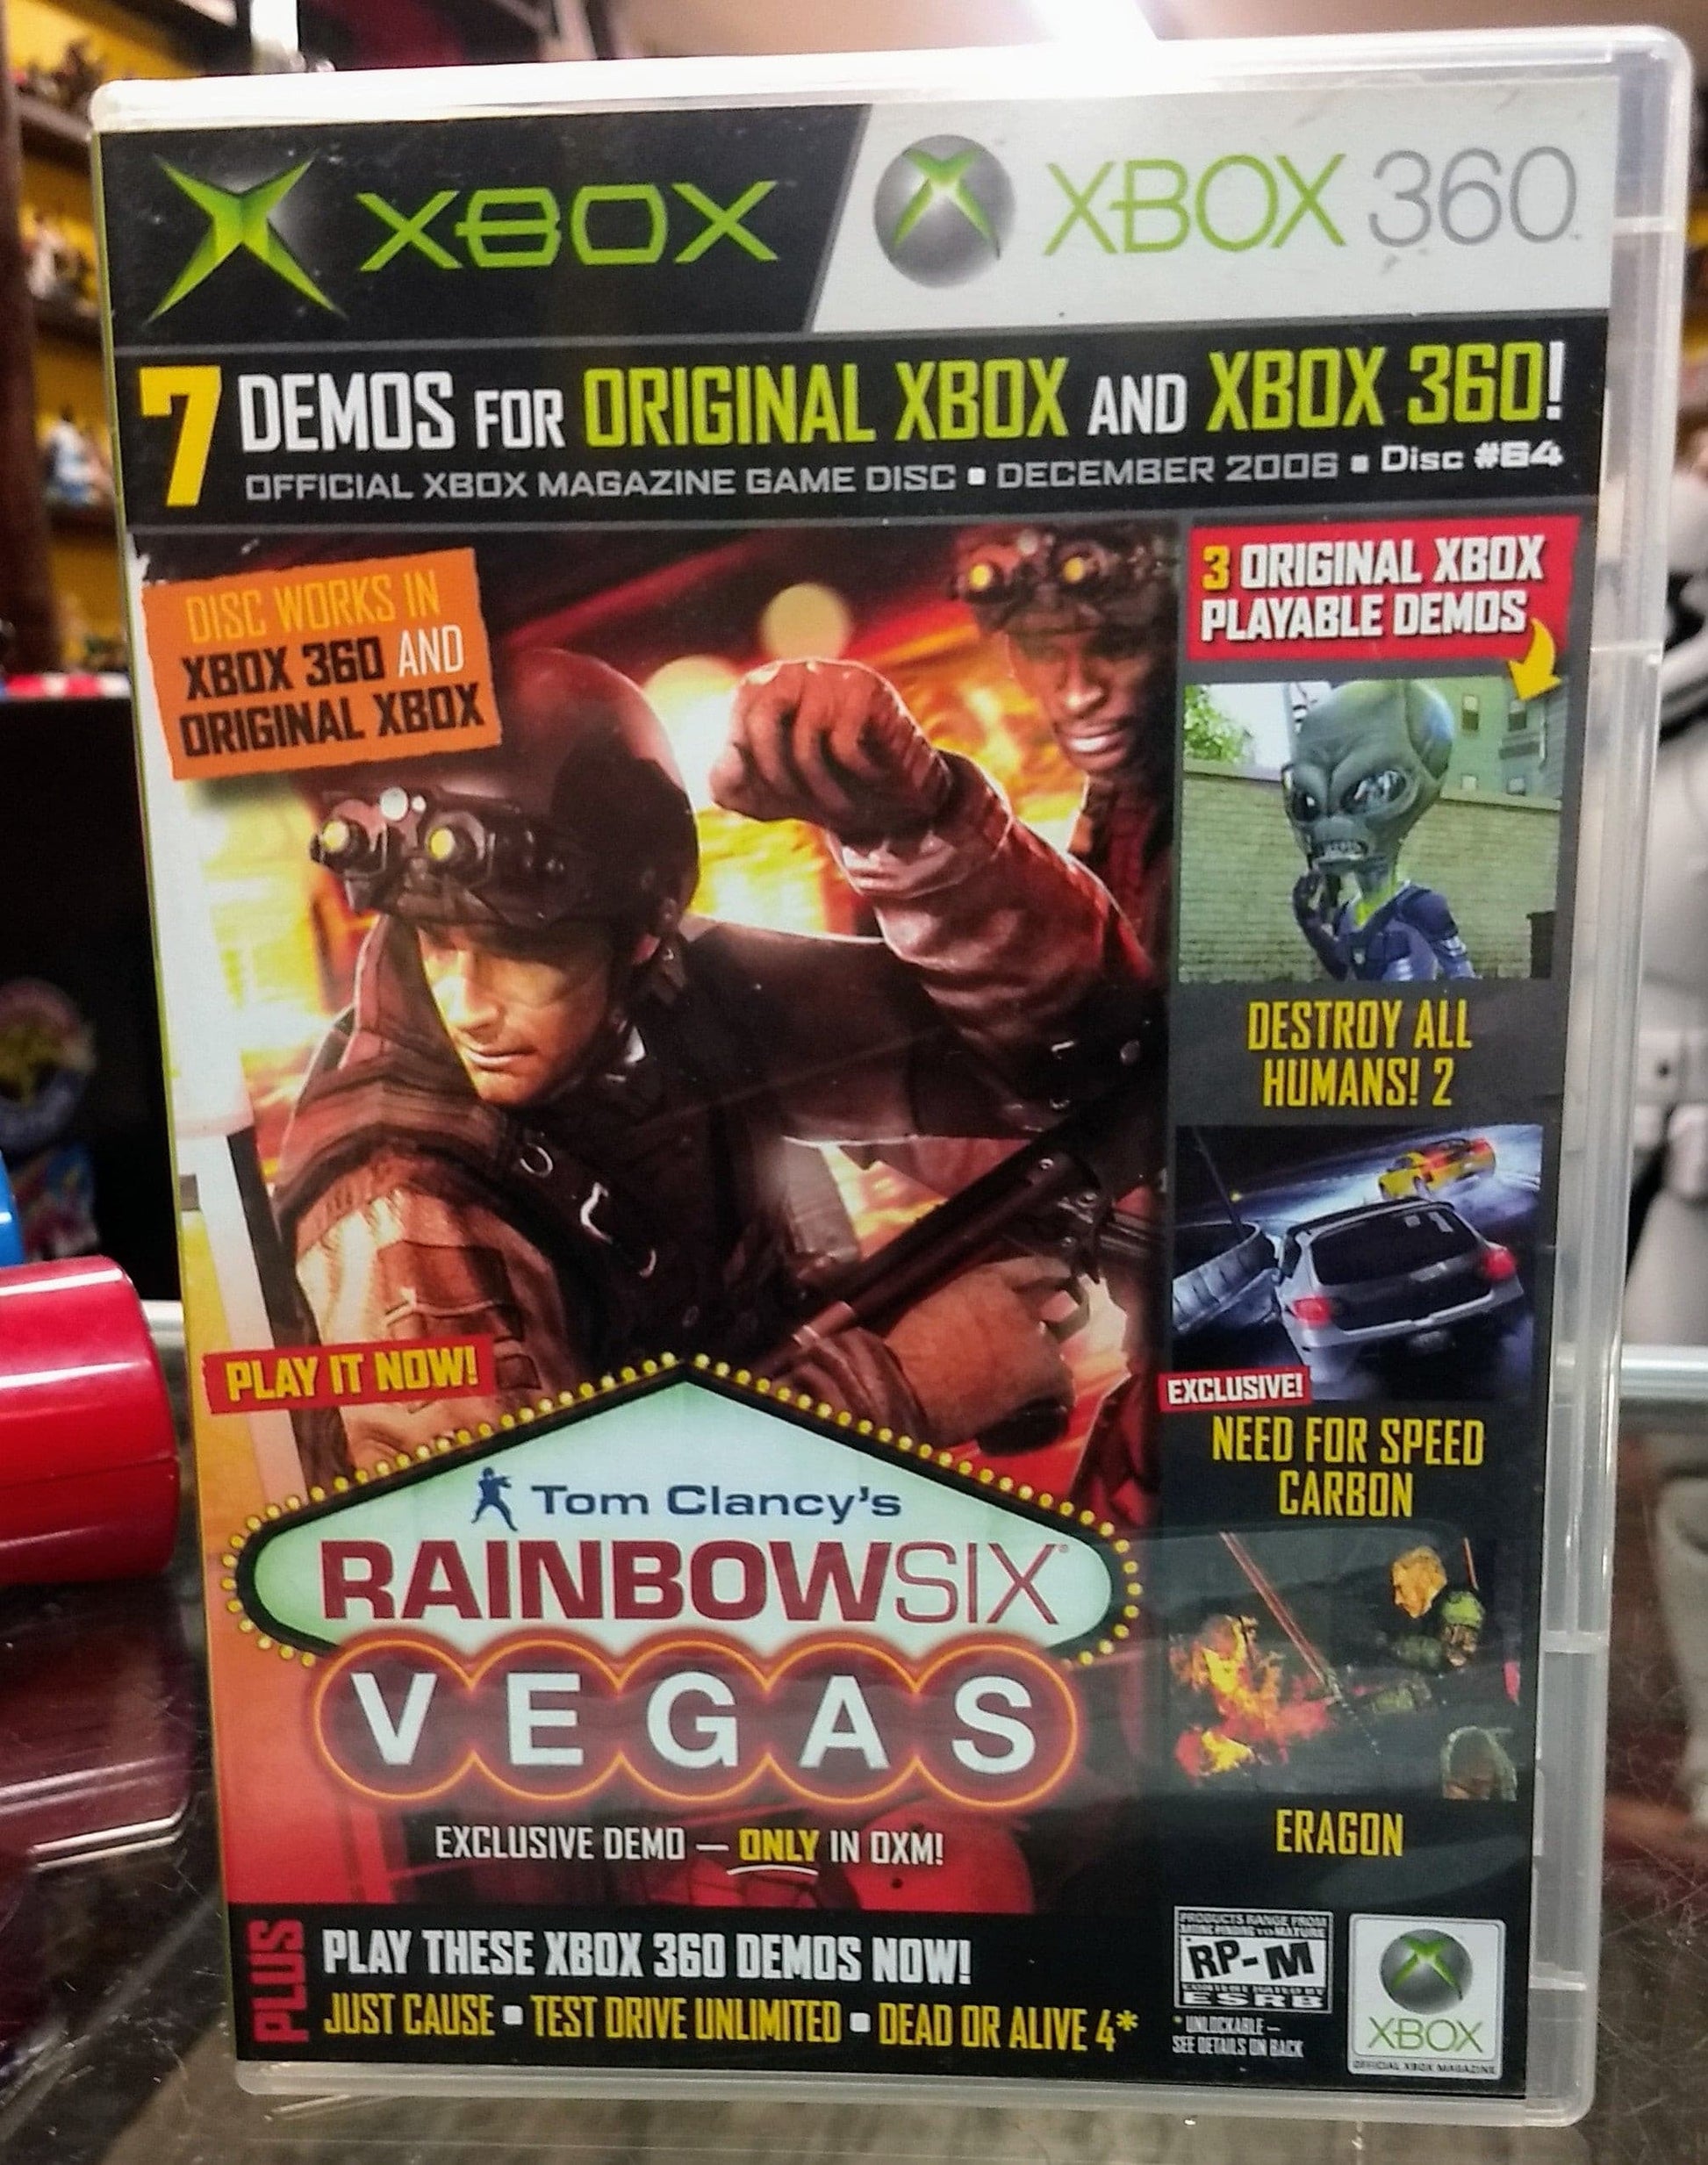 OFFICIAL XBOX MAGAZINE DEMO DISC 64 (XBOX 360 X360) - jeux video game-x